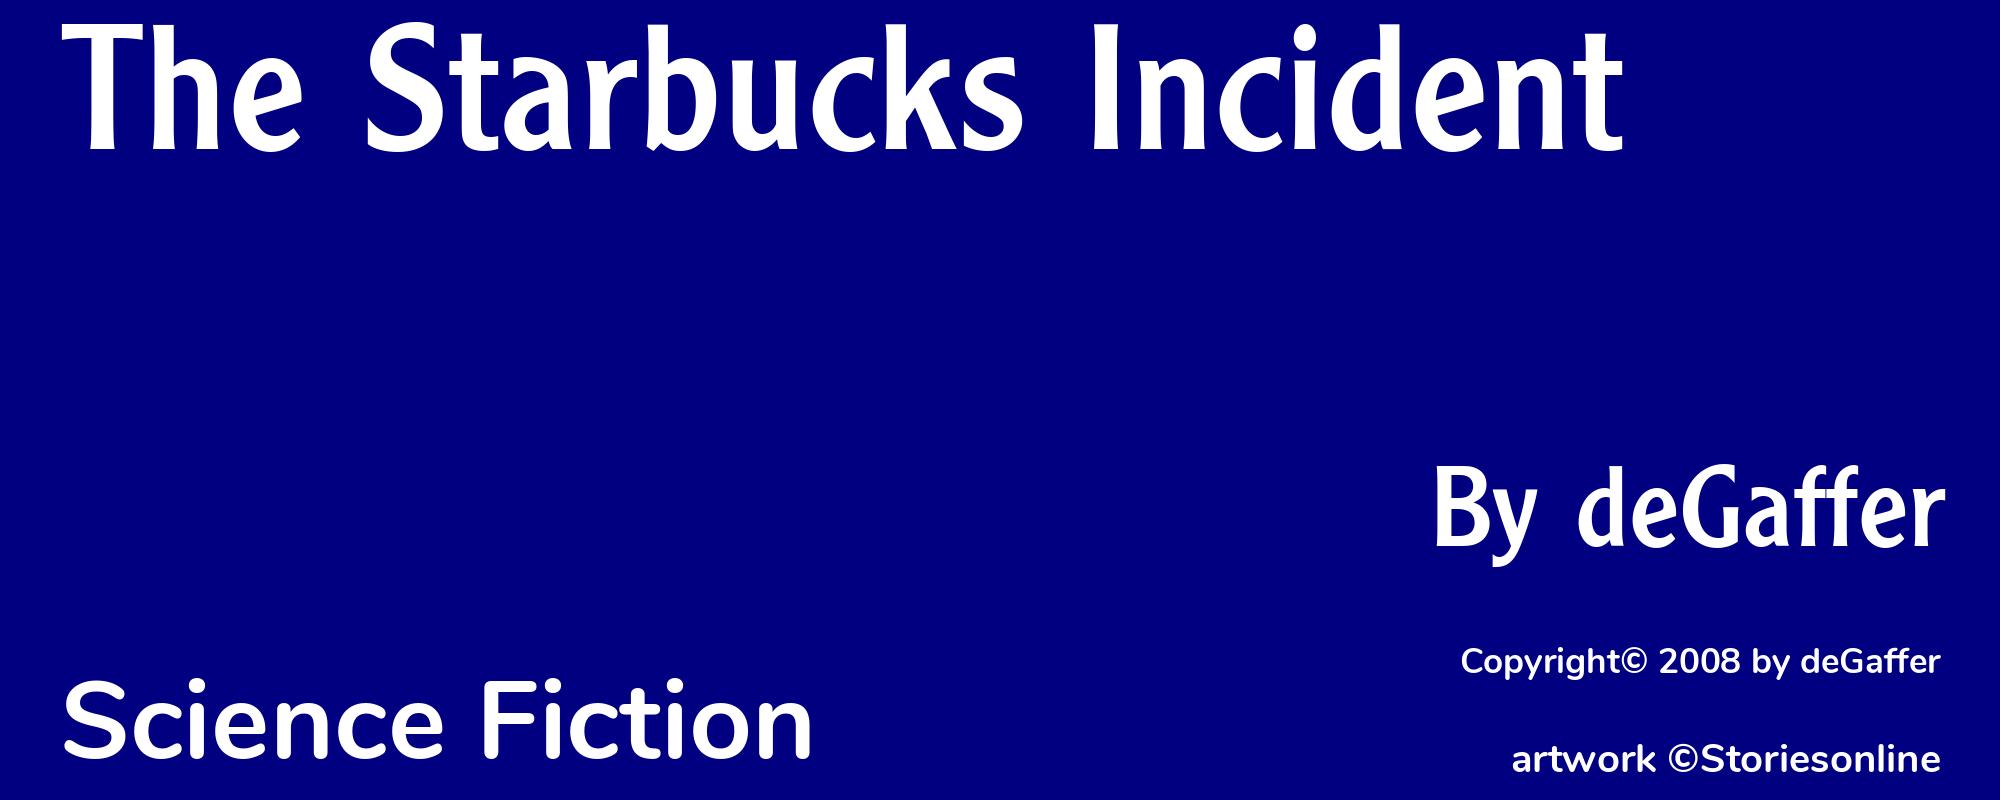 The Starbucks Incident - Cover